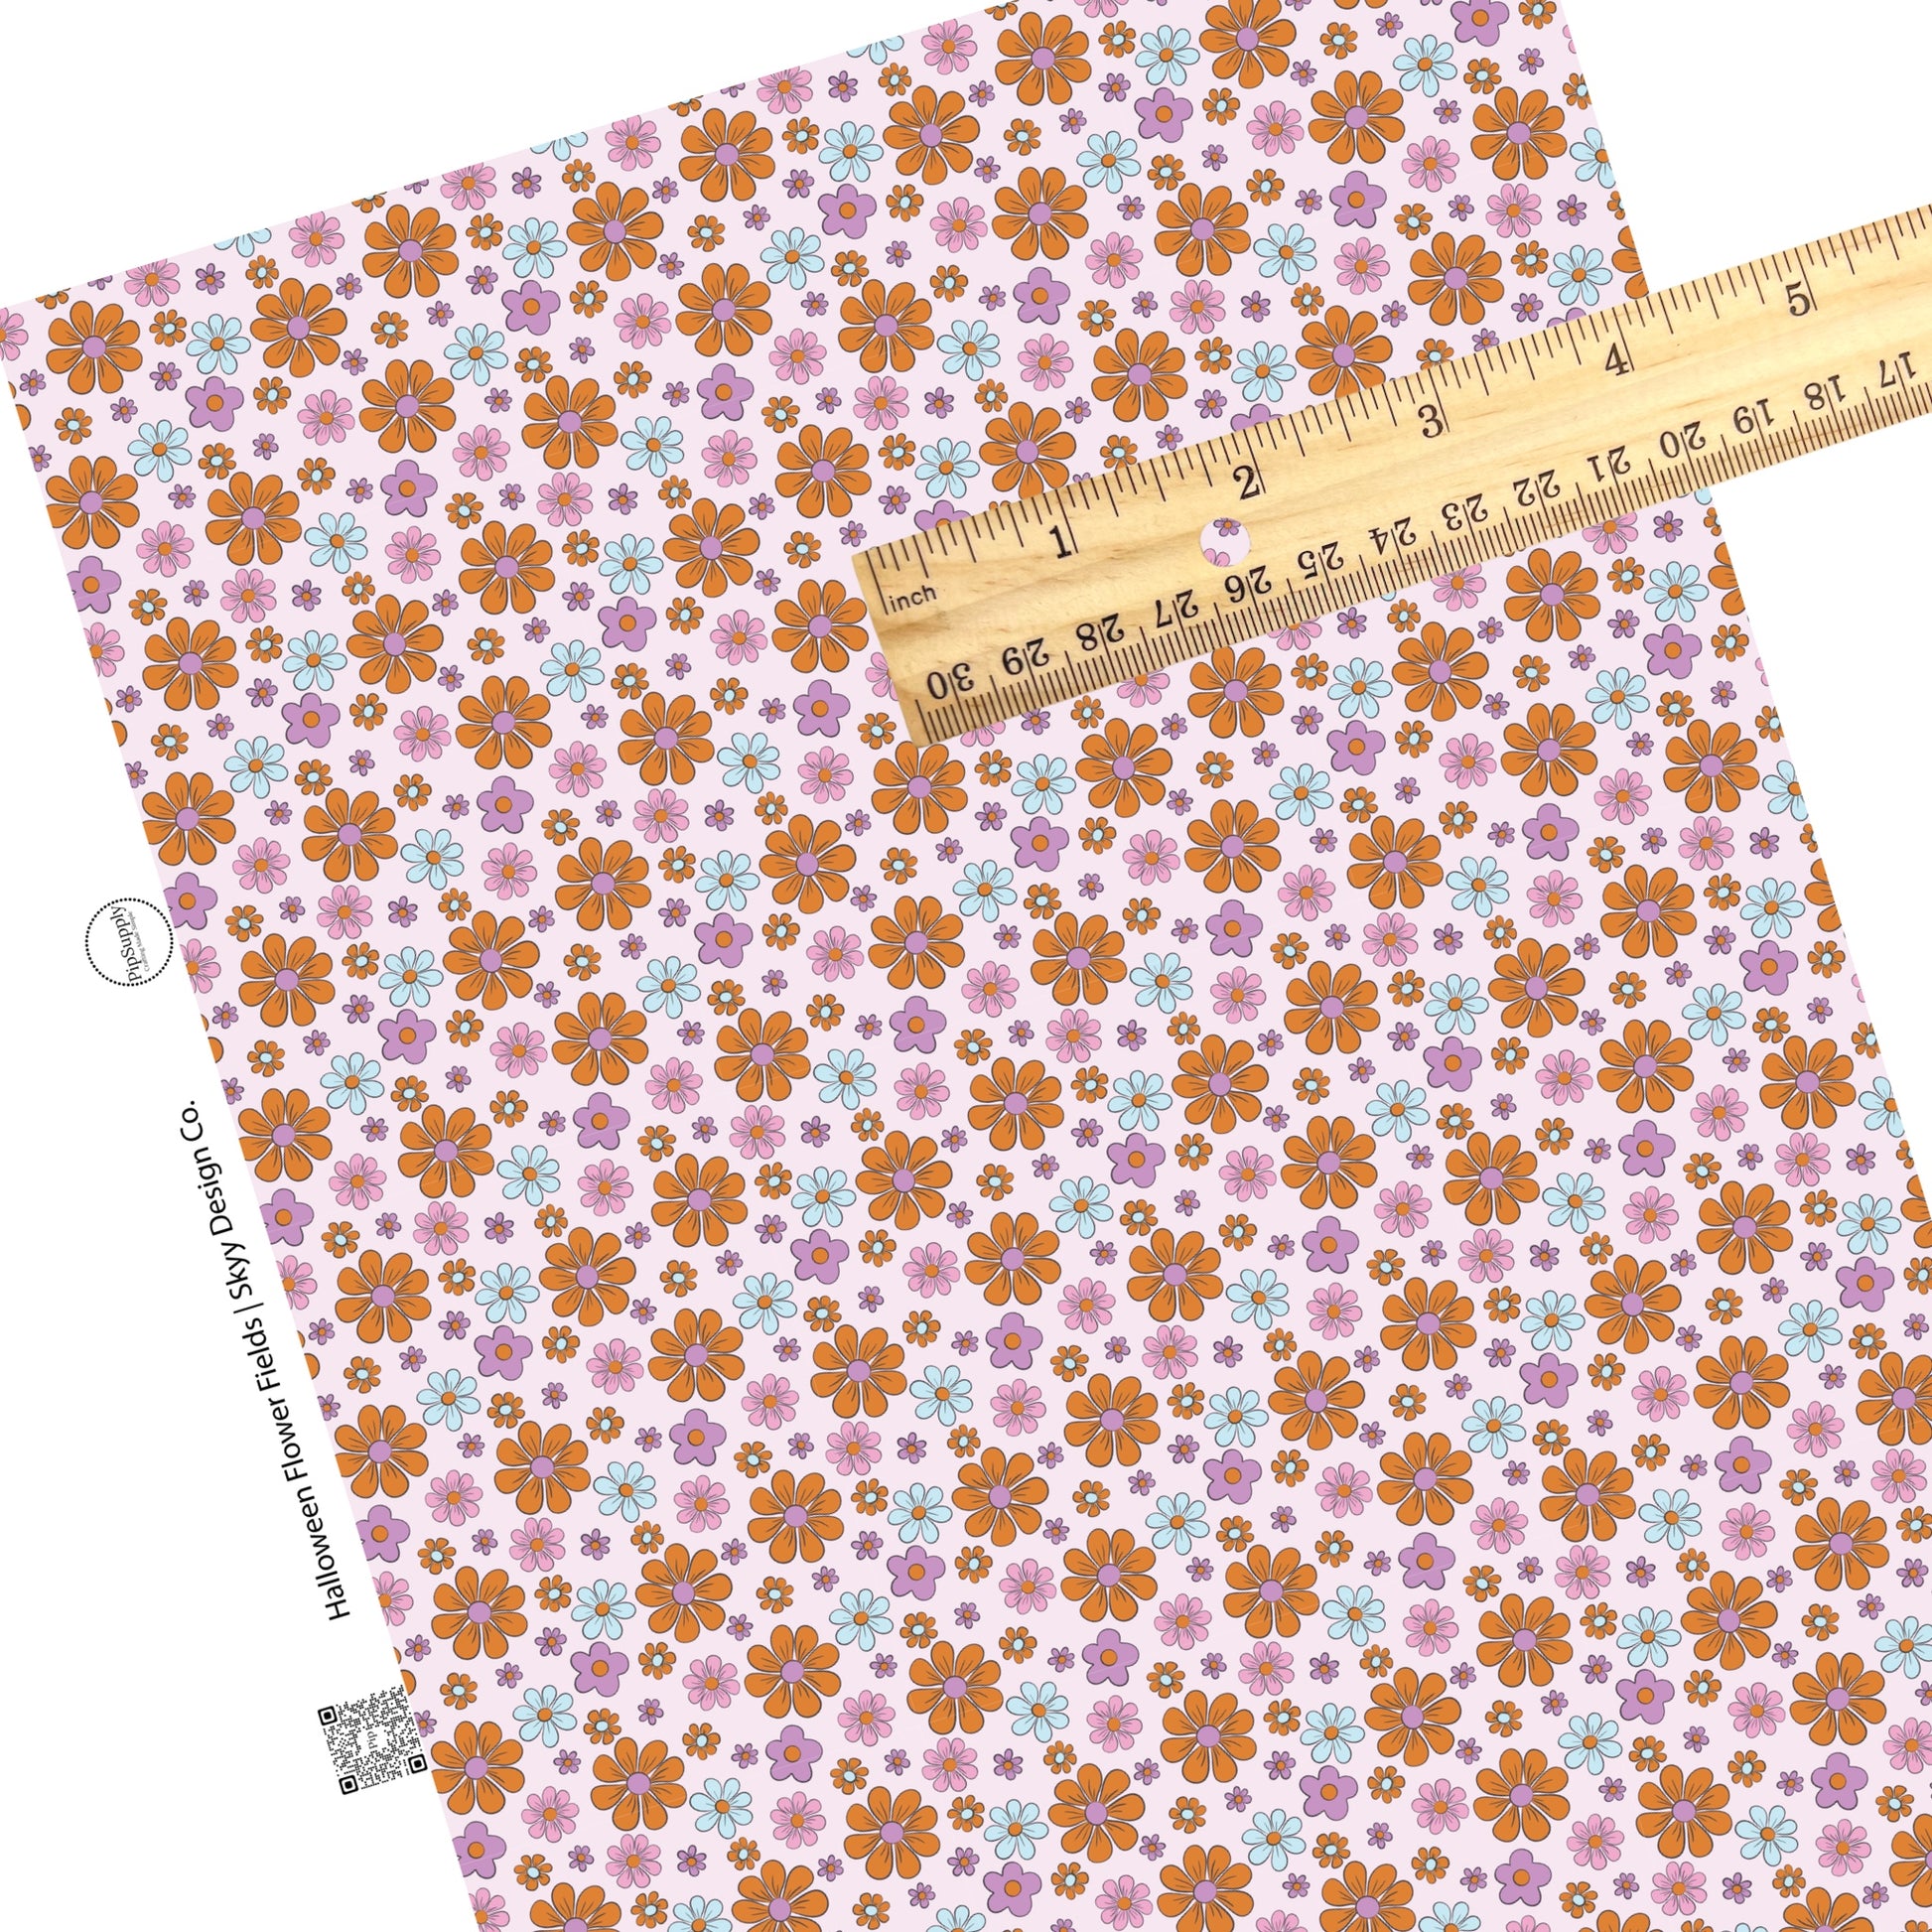 These Halloween flower themed pink faux leather sheets contain the following design elements: small and large bright daisies in pink, purple, light blue, and orange on pastel pink. Our CPSIA compliant faux leather sheets or rolls can be used for all types of crafting projects.